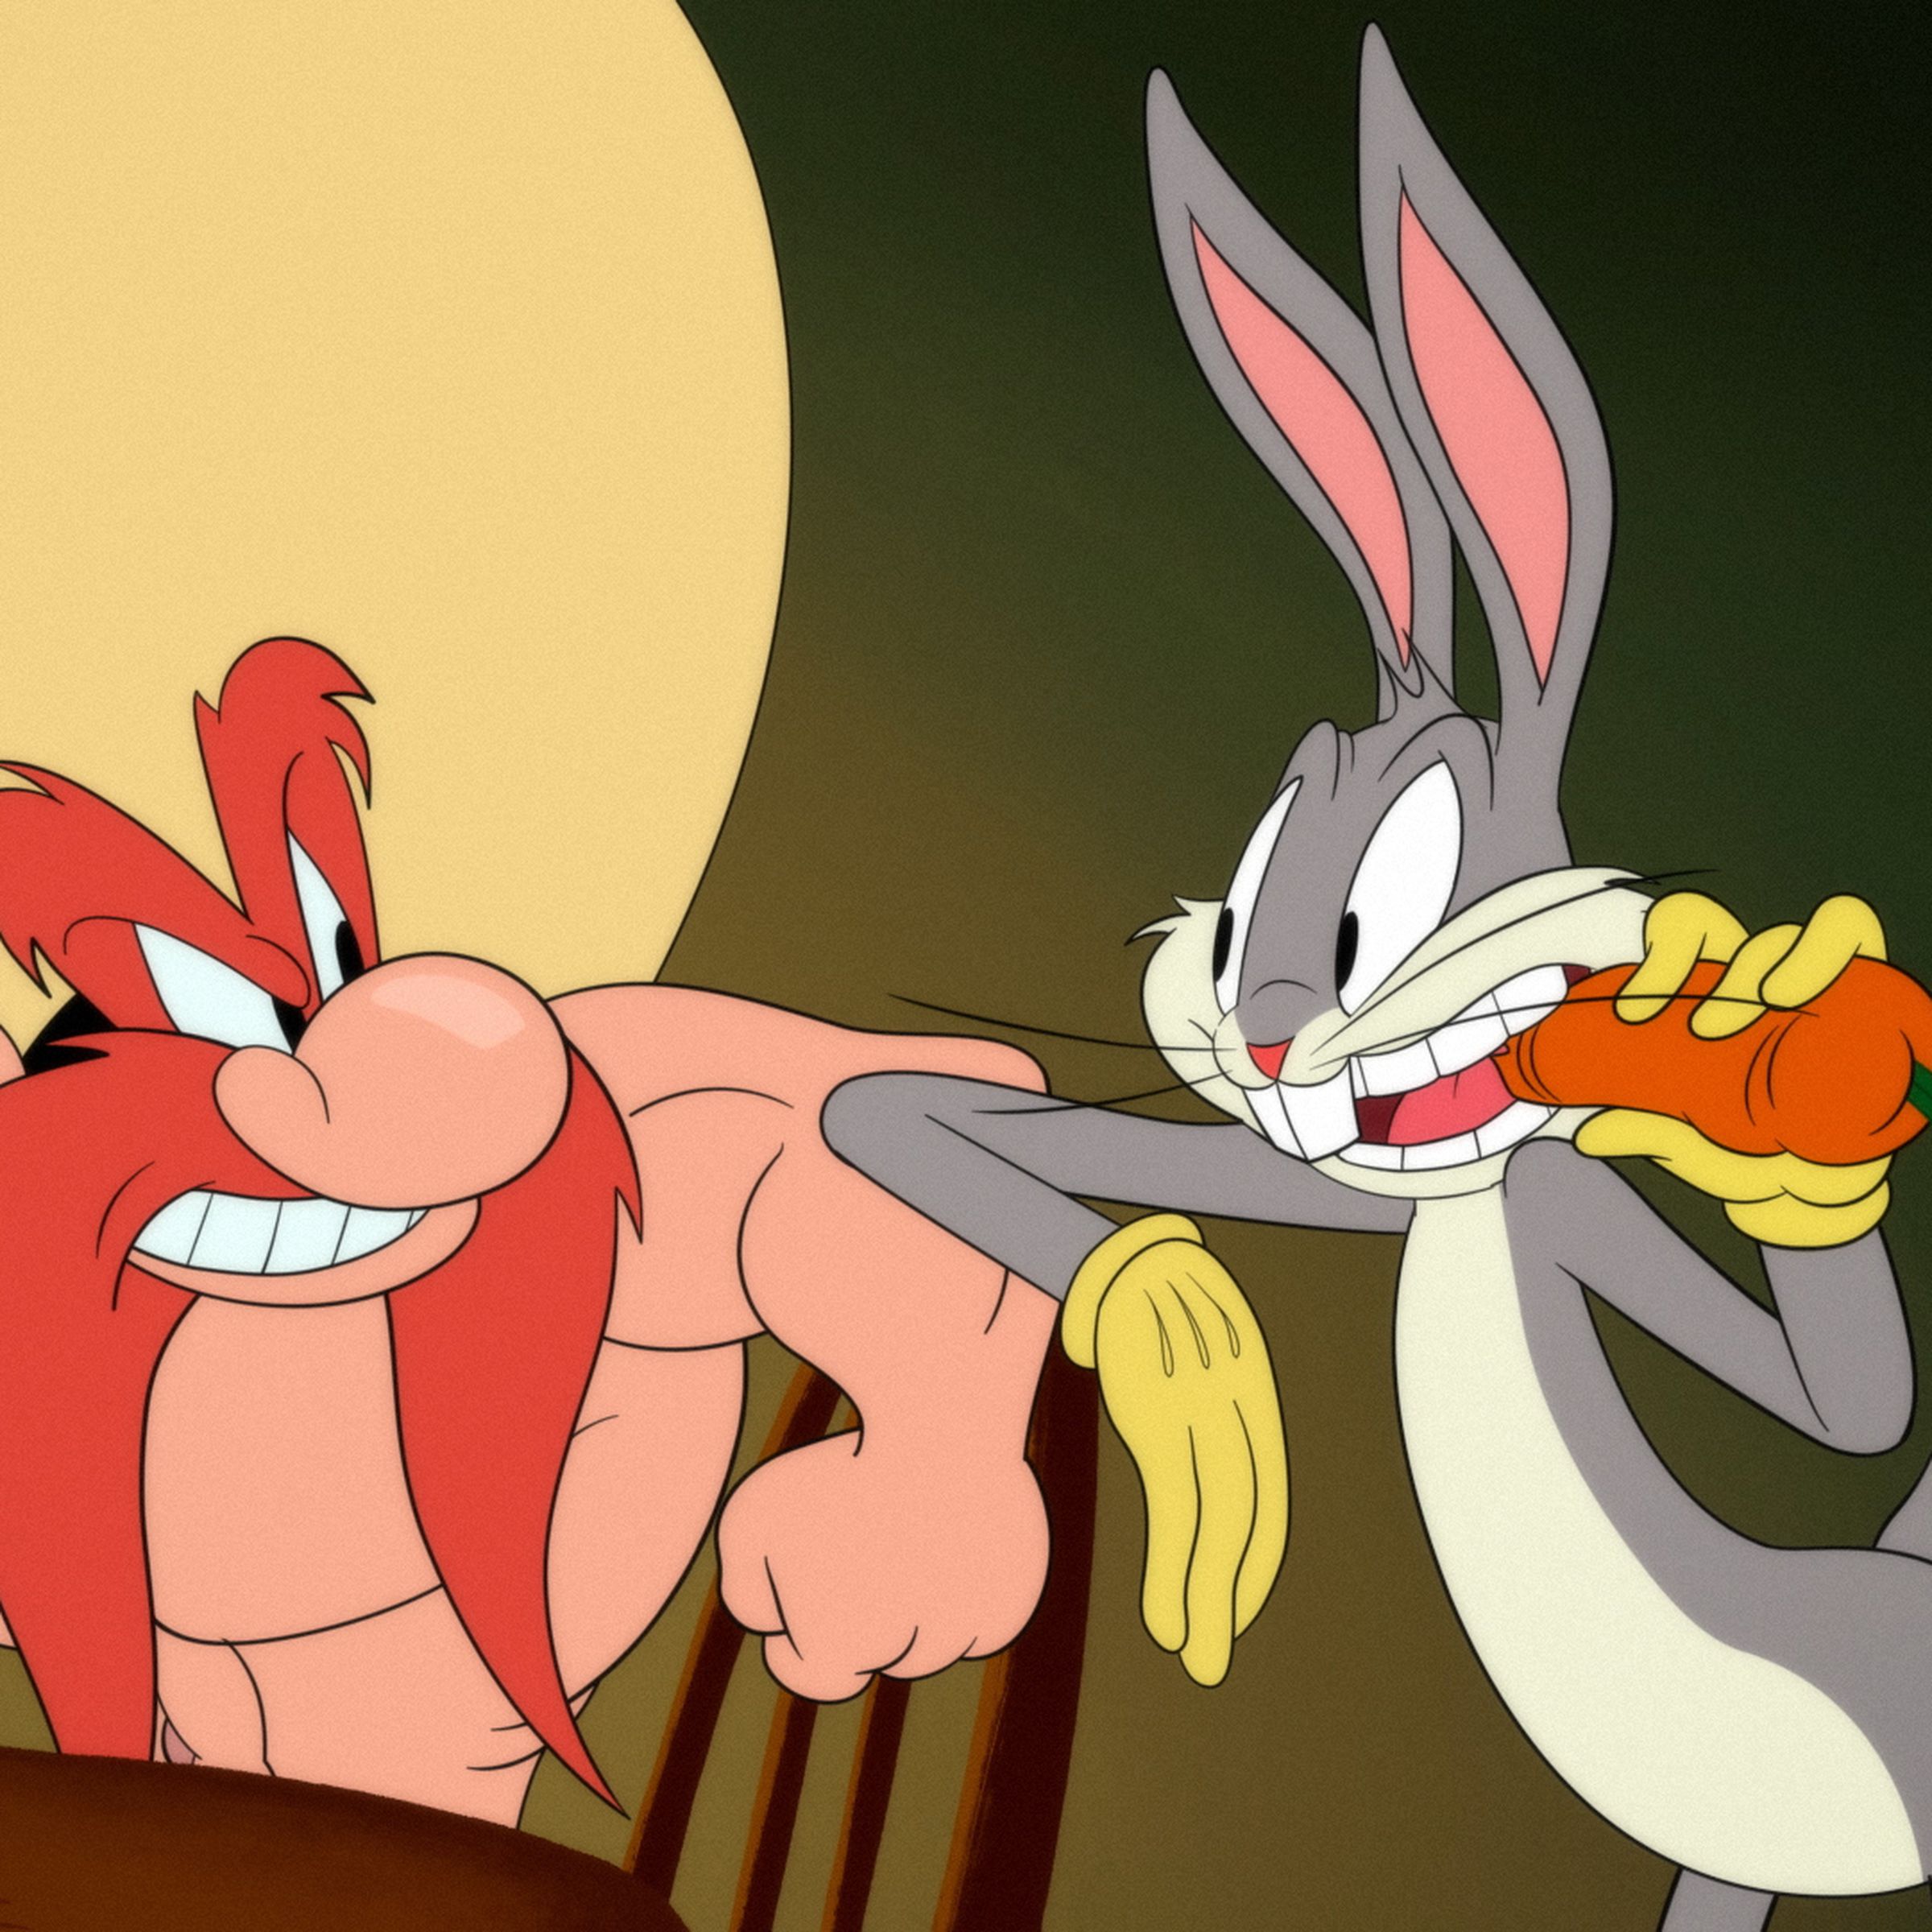 An image from a Looney Tunes cartoon.